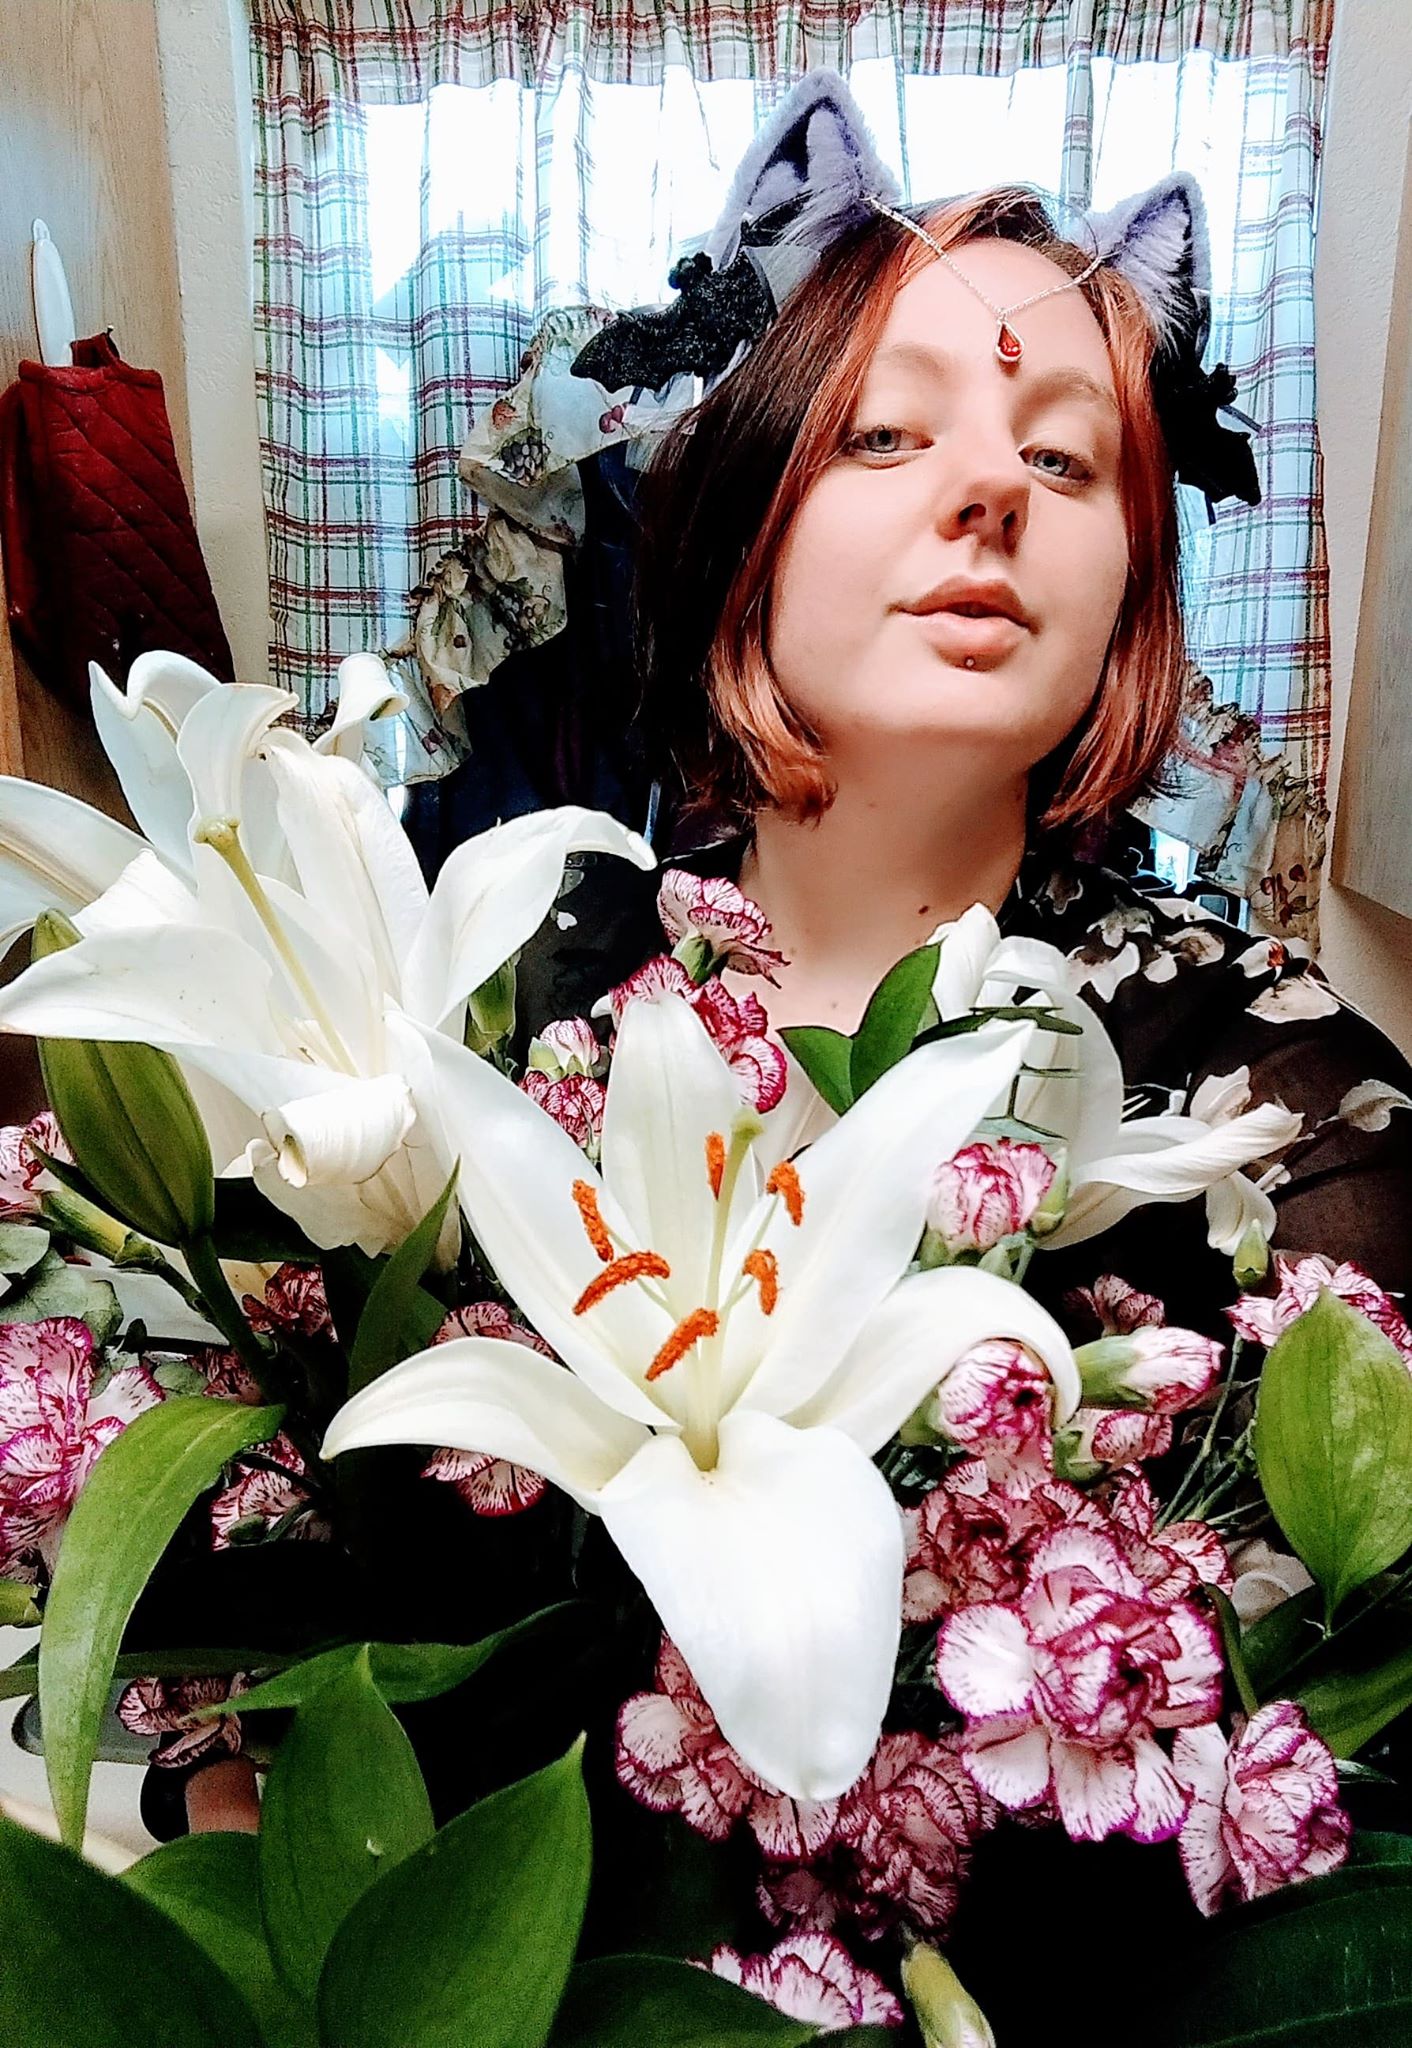 Floral Gifts With BellaDonna DeWolf post thumbnail